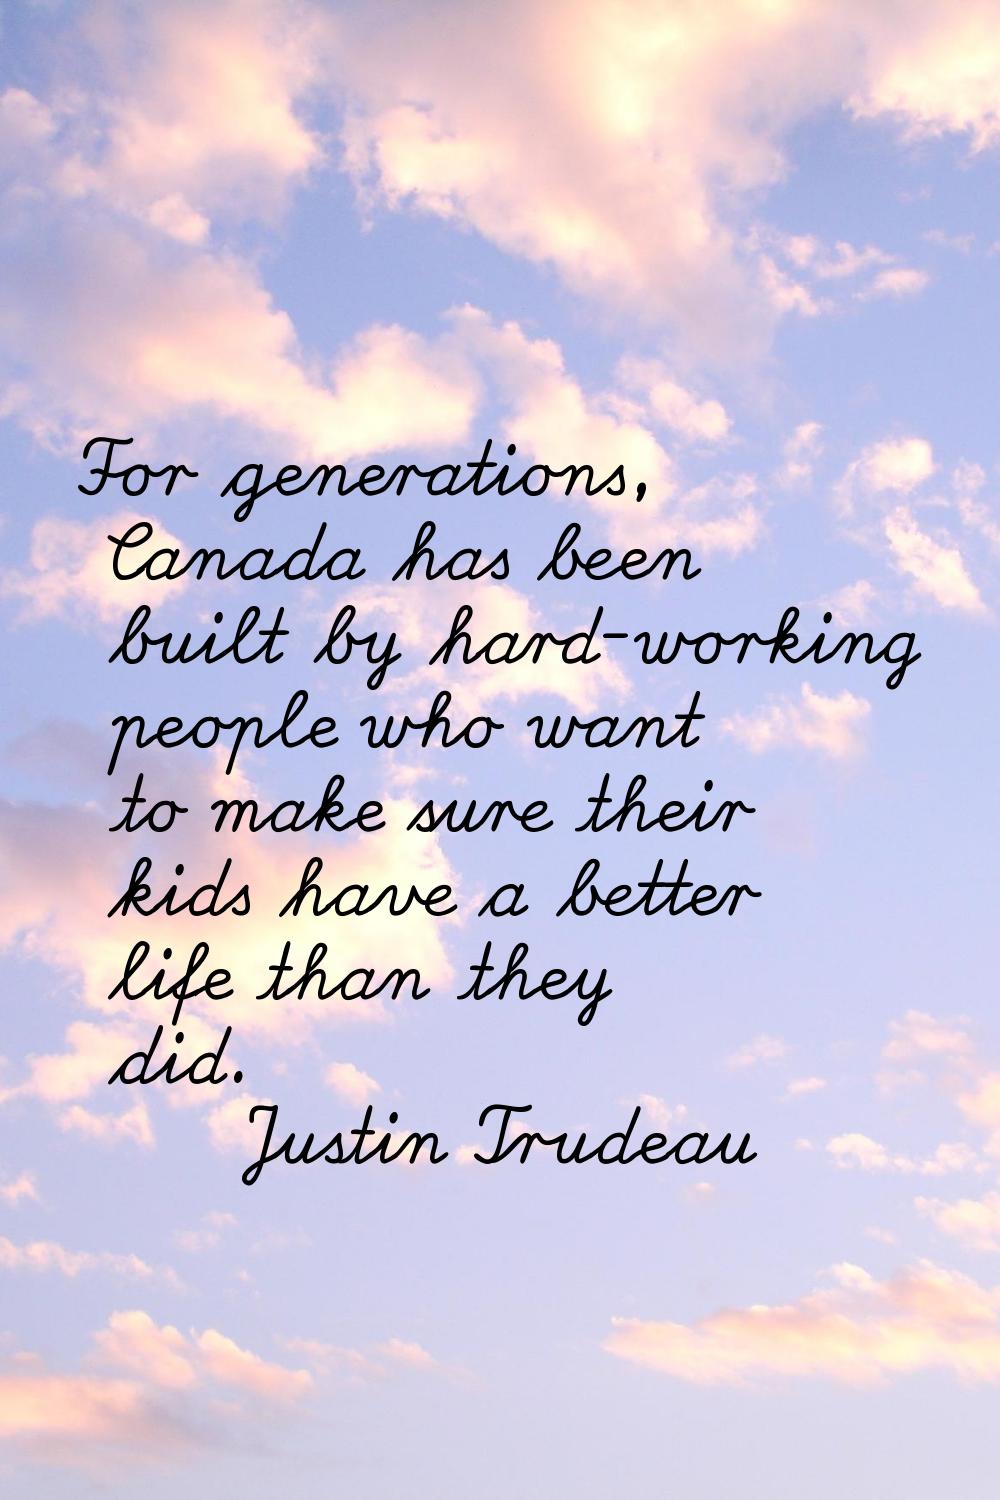 For generations, Canada has been built by hard-working people who want to make sure their kids have